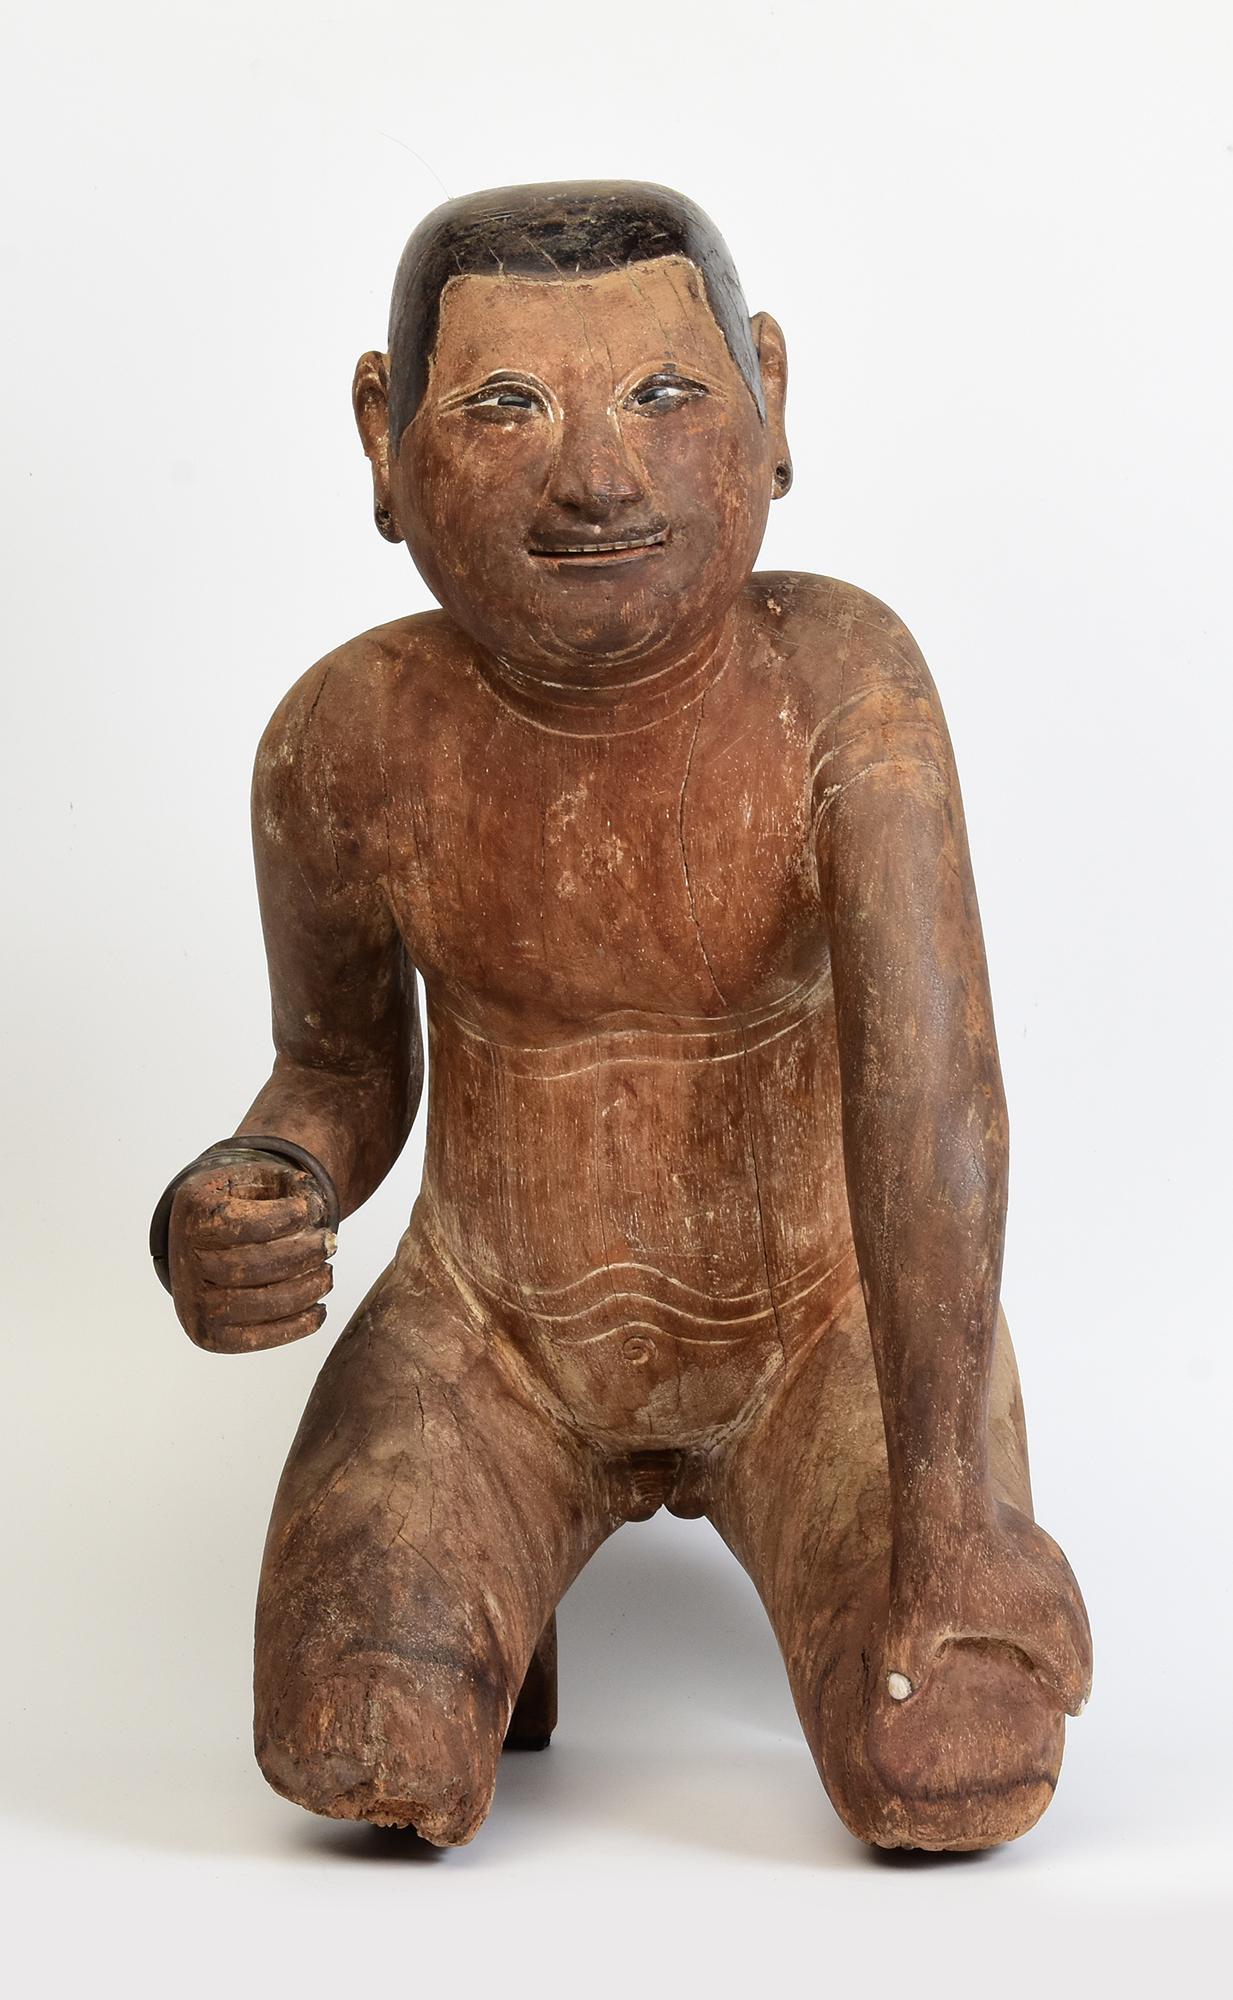 Antique Burmese wooden sitting boy.

Age: Burma, Early Mandalay Period, Early 19th Century
Size: Height 54 C.M. / Width 31 C.M.
Condition: Nice condition overall (some expected degradation due to its age).

100% satisfaction and authenticity